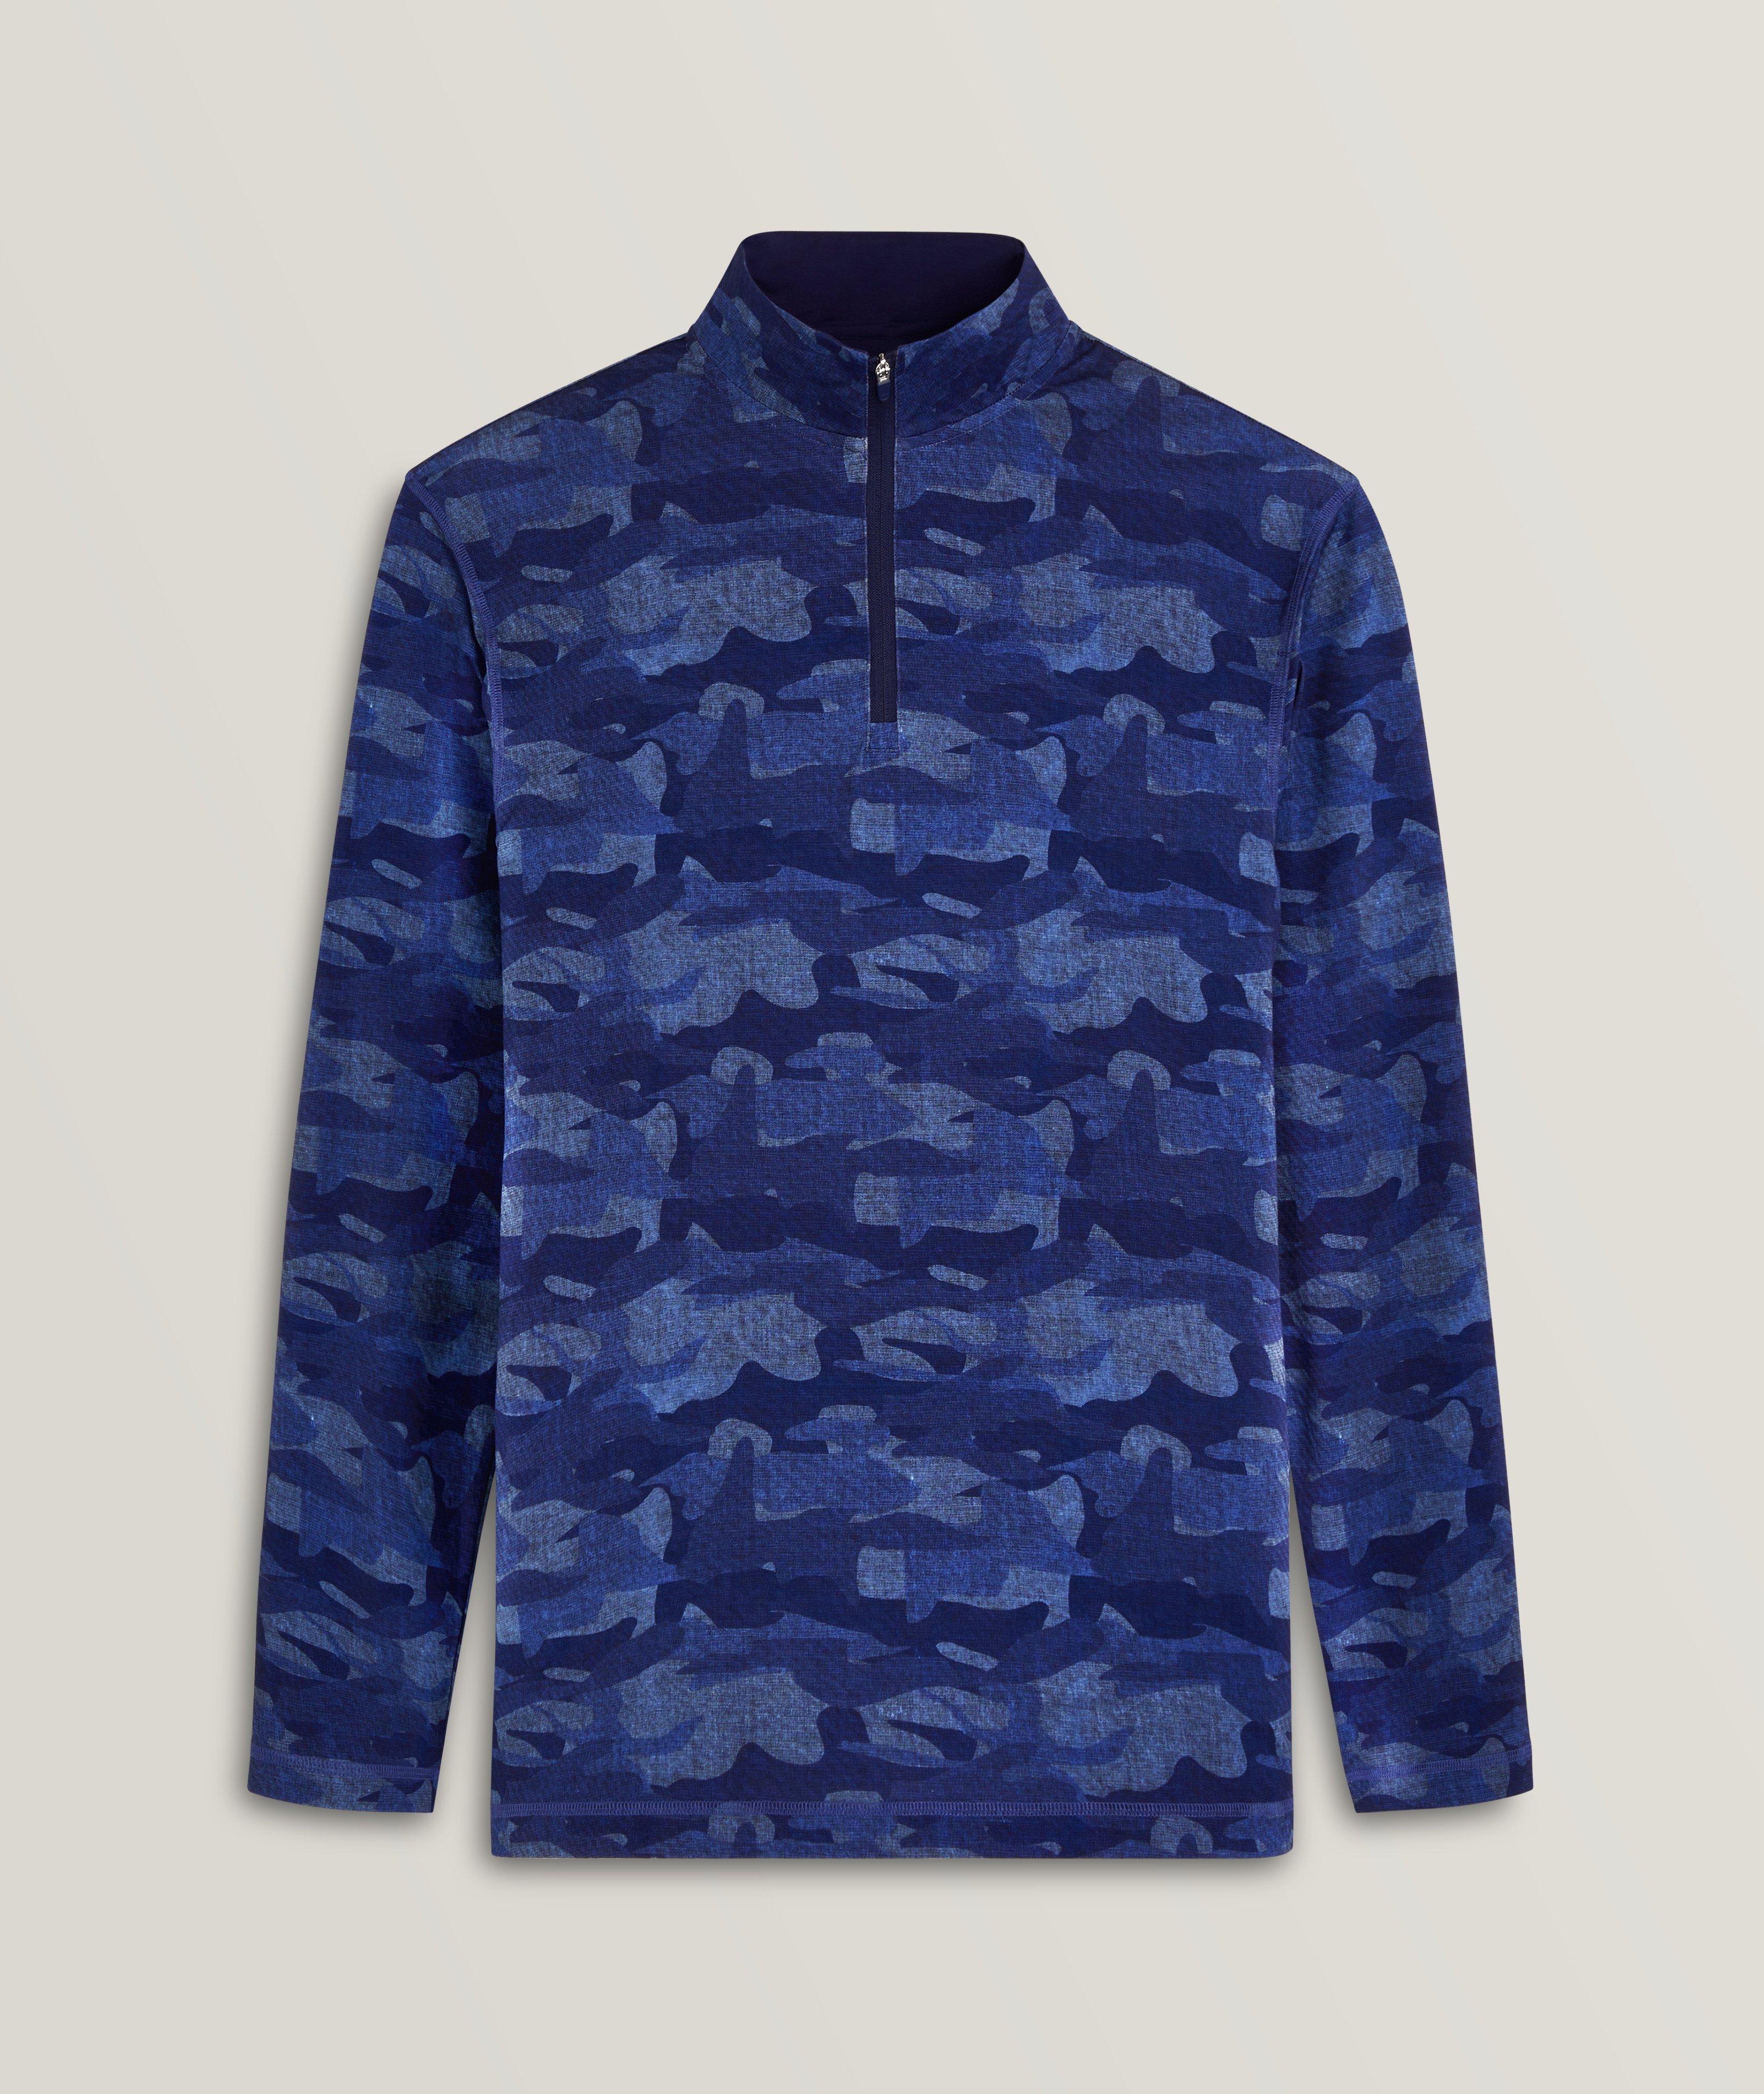 Anthony Camouflage Pattern OoohCotton Quarter Zip Pullover image 0